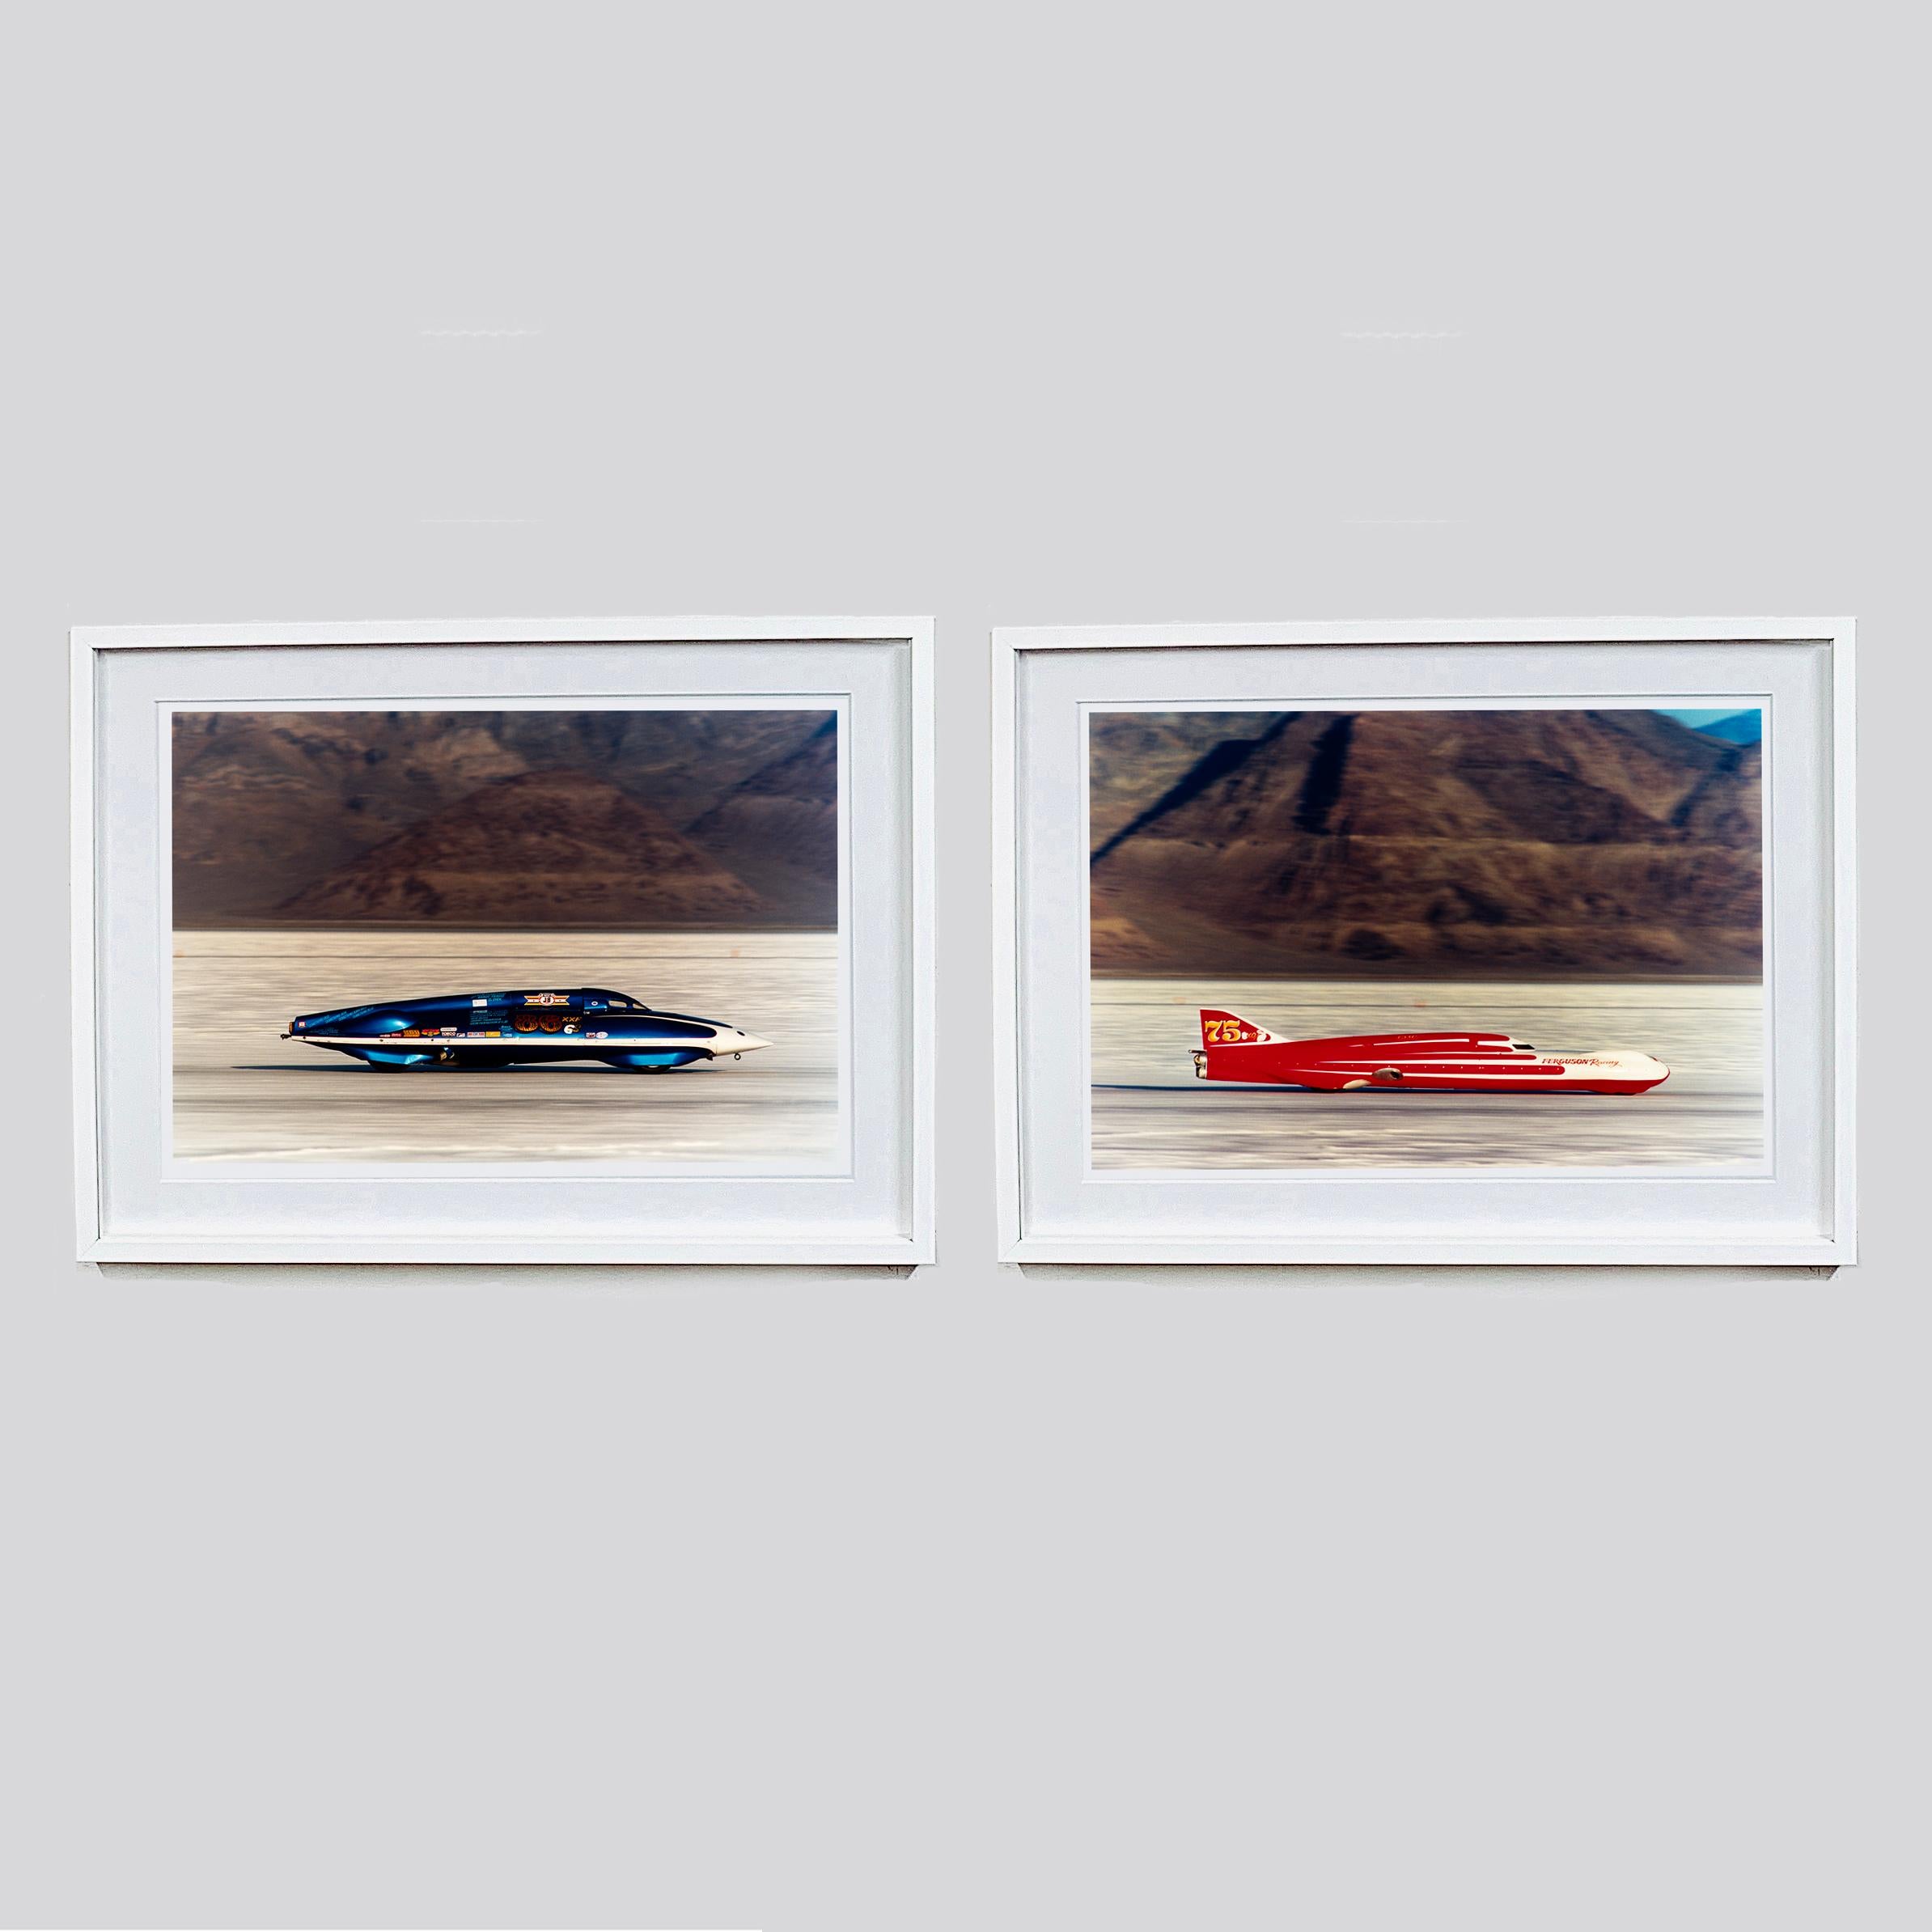 LSR Racing Streamliner, photograph taken in the iconic home of speed, Bonneville Salt Flats, just as the mountains contrast with the flatness, Richard Heeps captured this blue racing car at high speed contrasting with the still effect of the